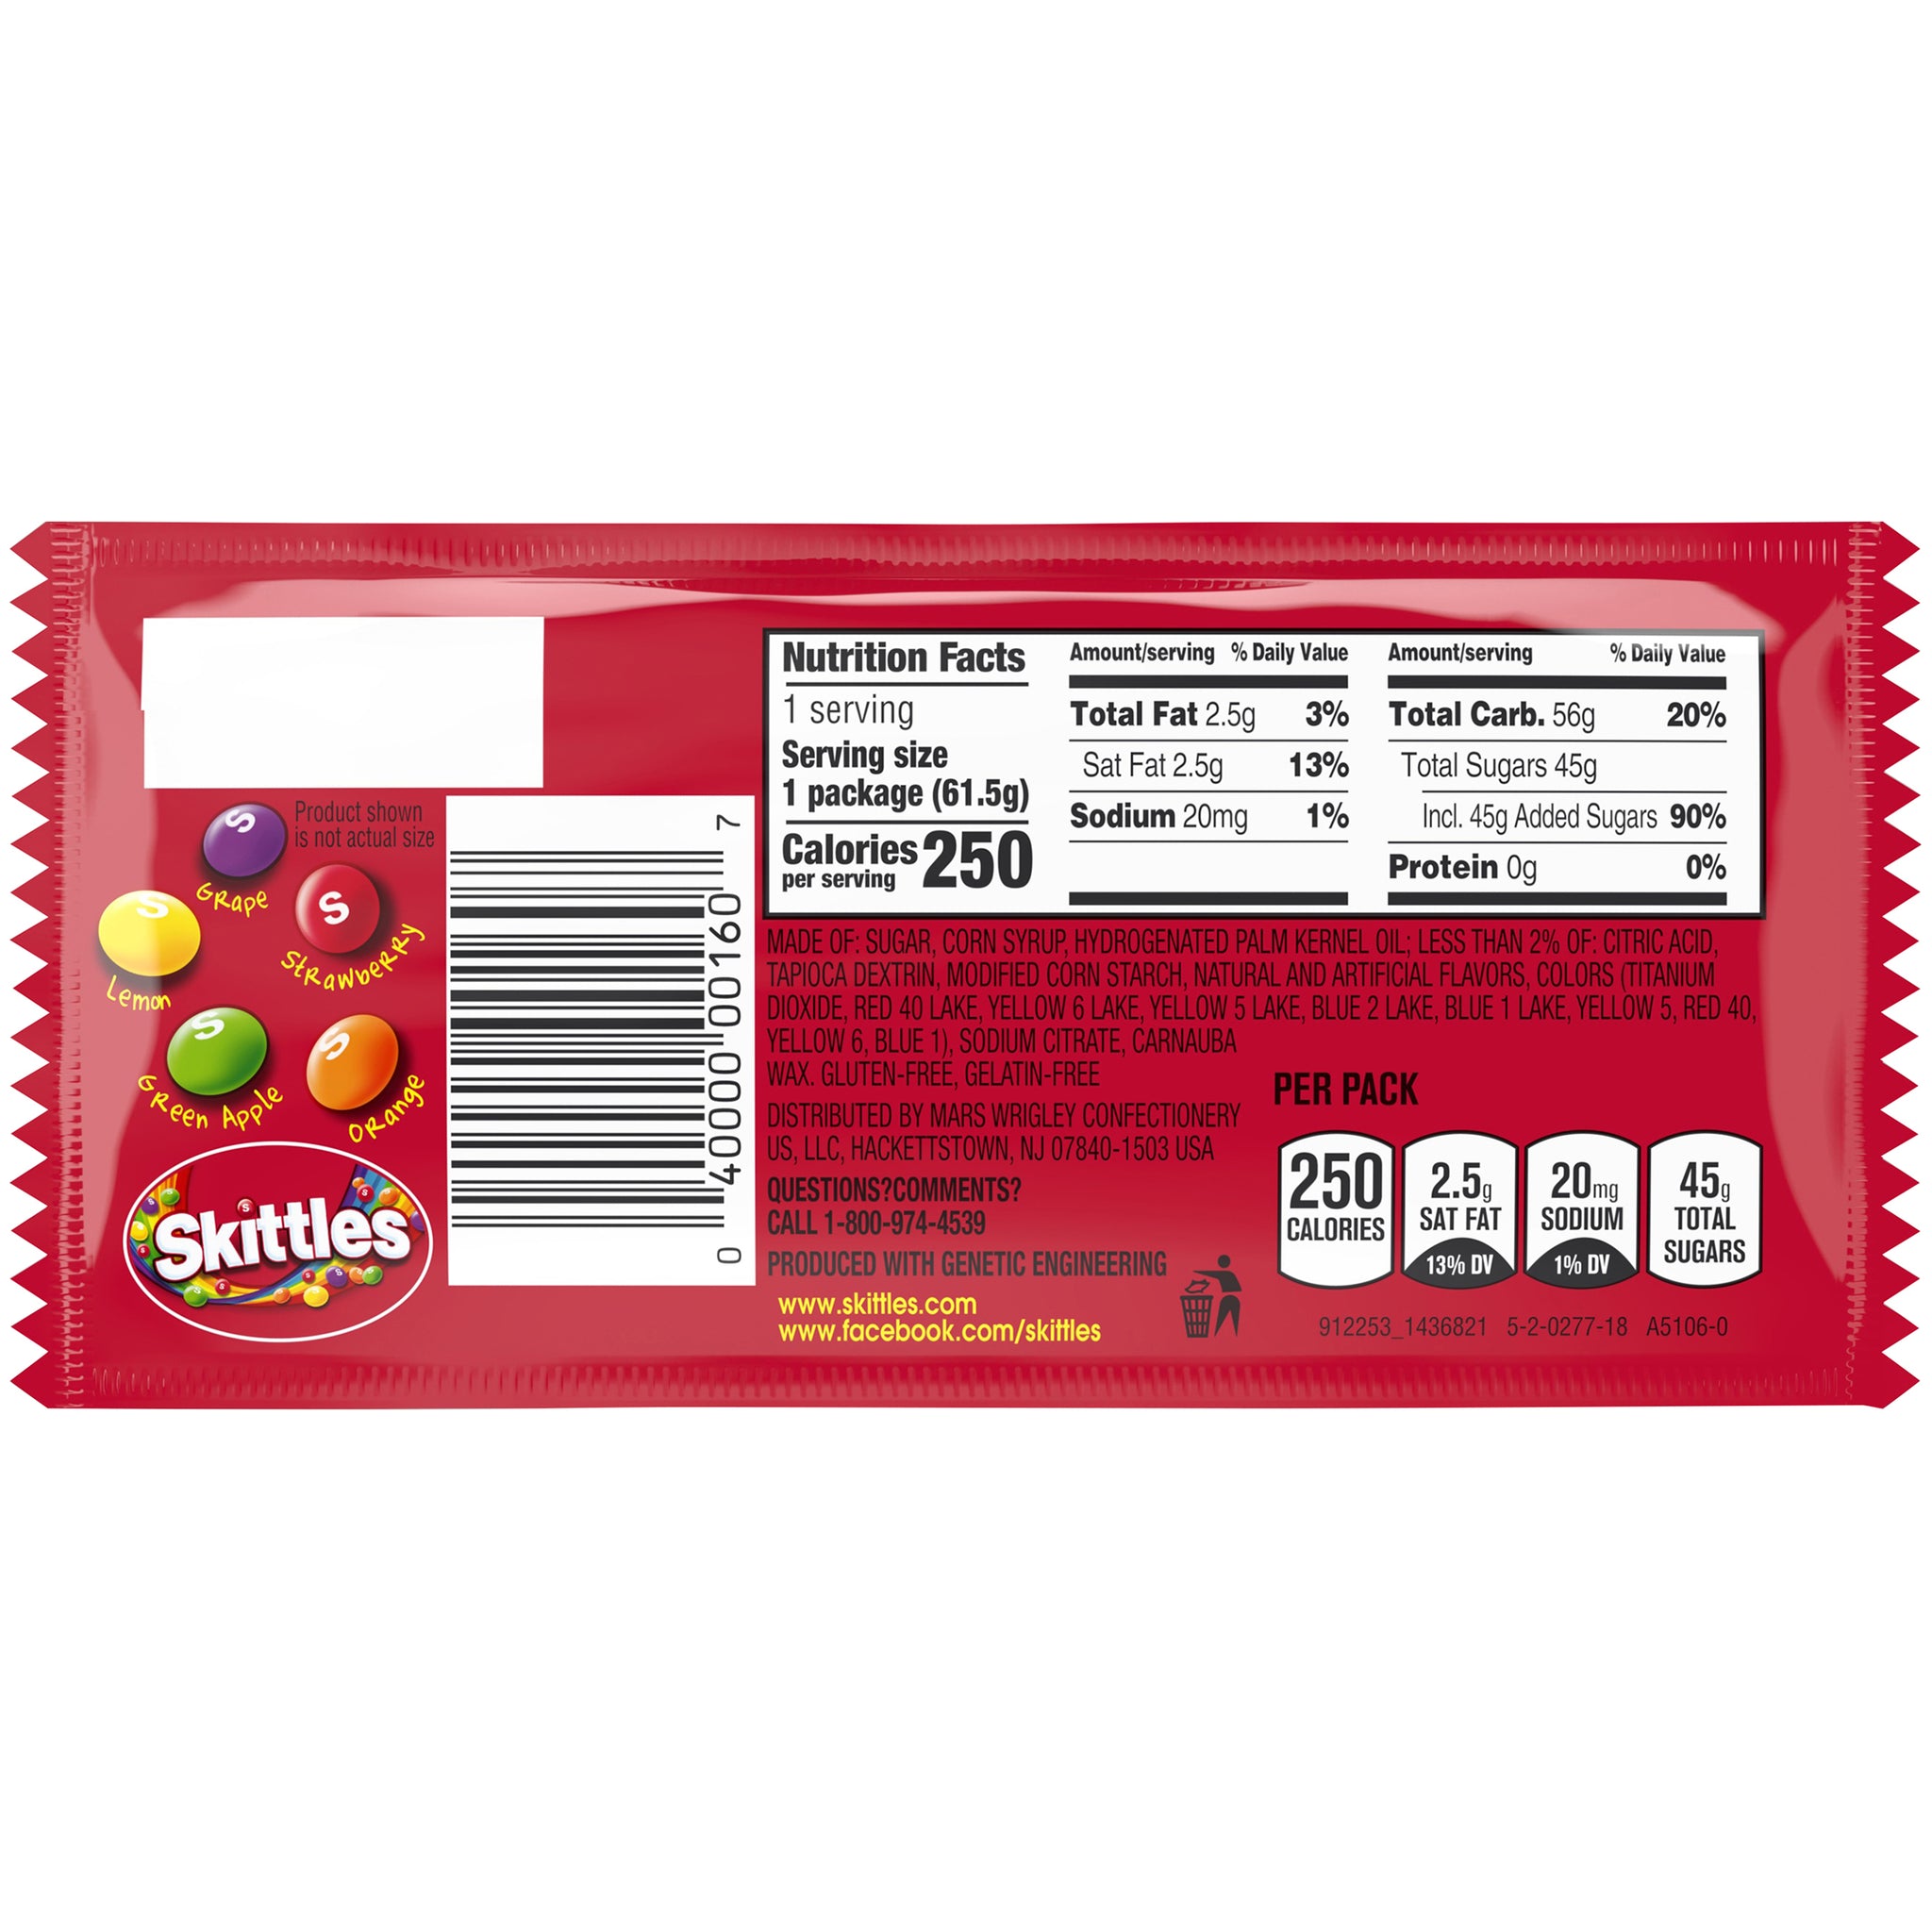 Skittles® Original Chewy Candy Single Pack, 2.17 oz - Foods Co.